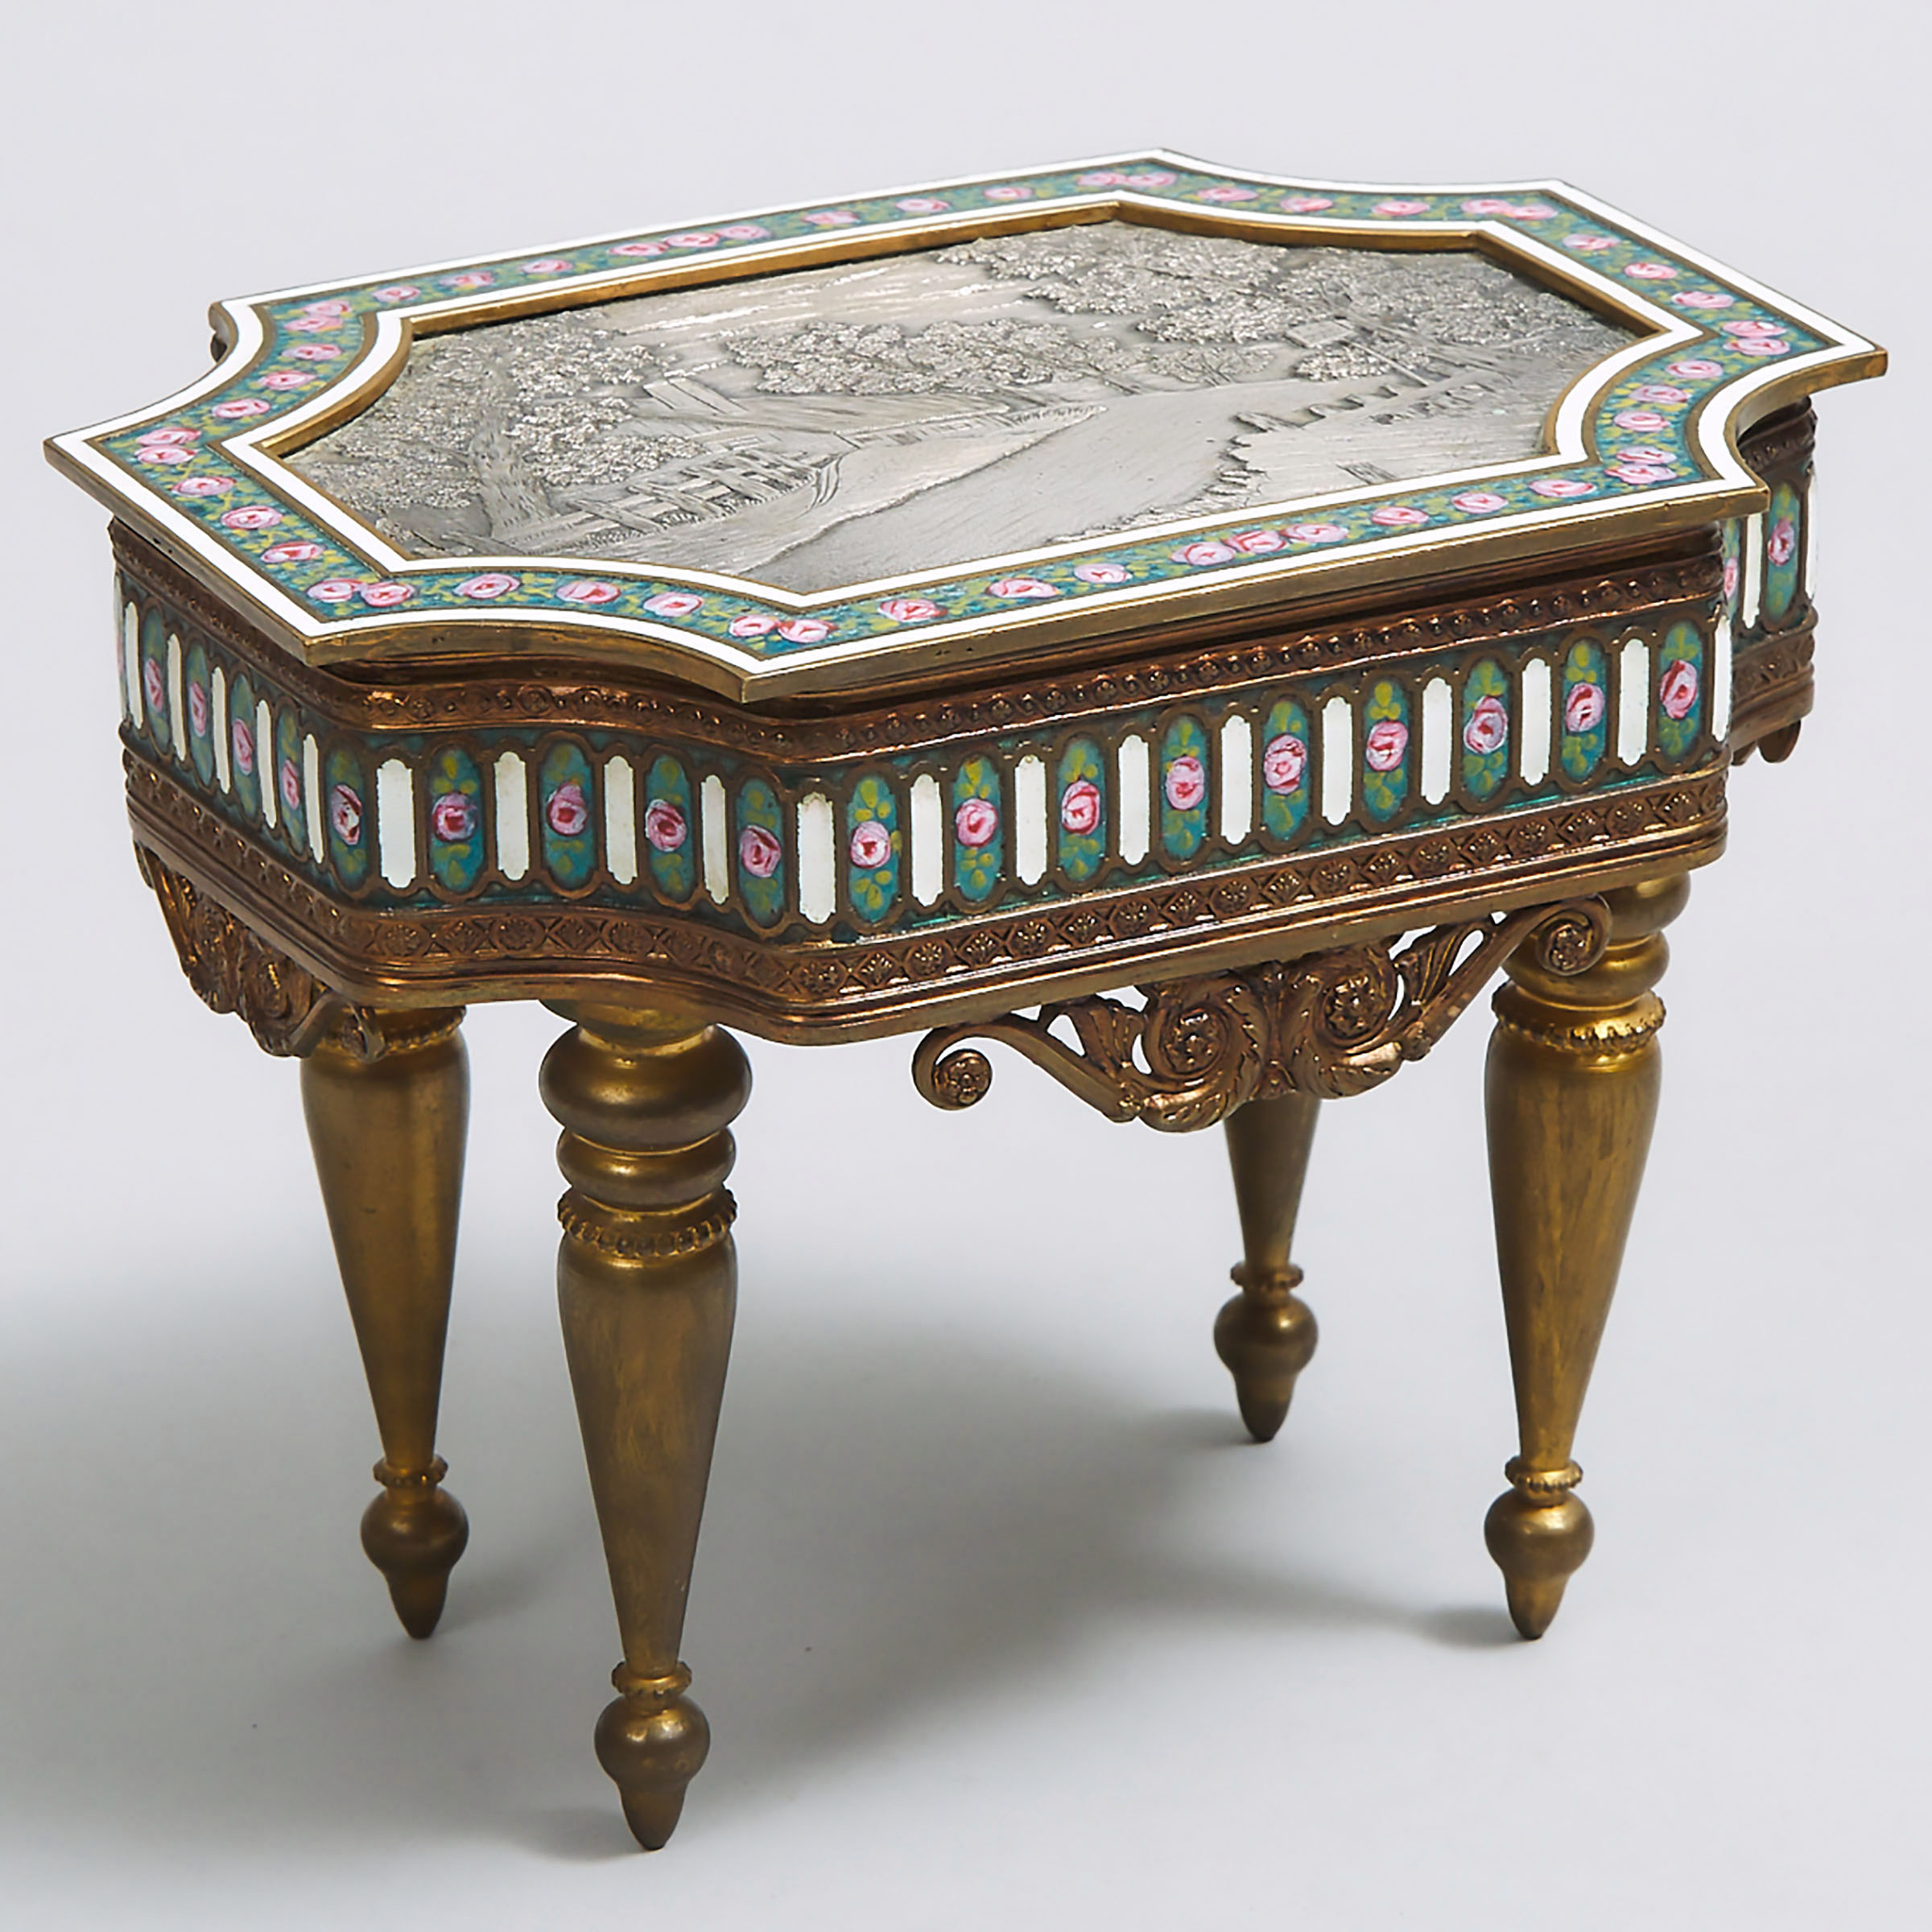 French Silvered, Gilt and Enamelled Bronze Jewellery Casket, early 20th century